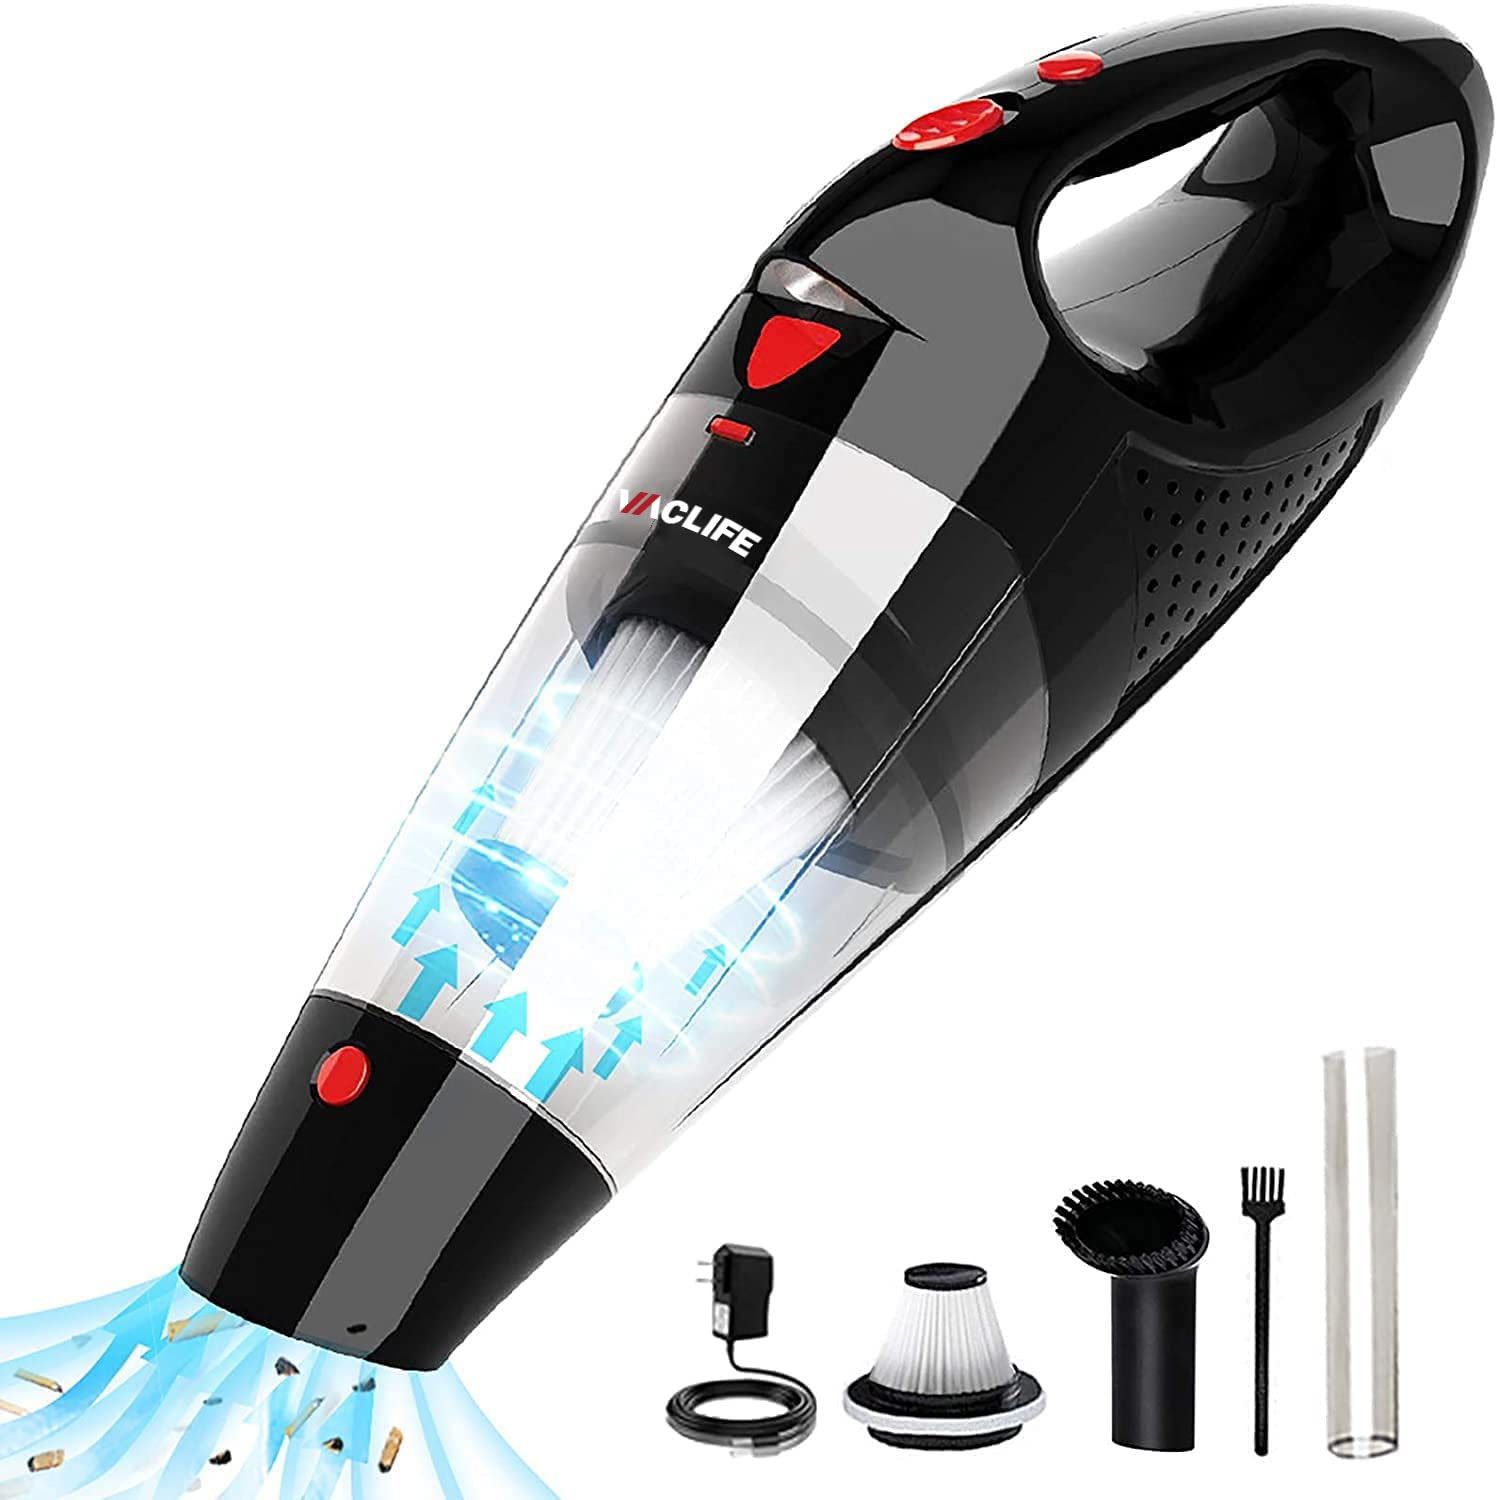 Powools RNAB0BN3NX44S powools pet hair handheld vacuum - car vacuum  cordless rechargeable by vaclife, well-equipped hand vacuum for carpet,  couch